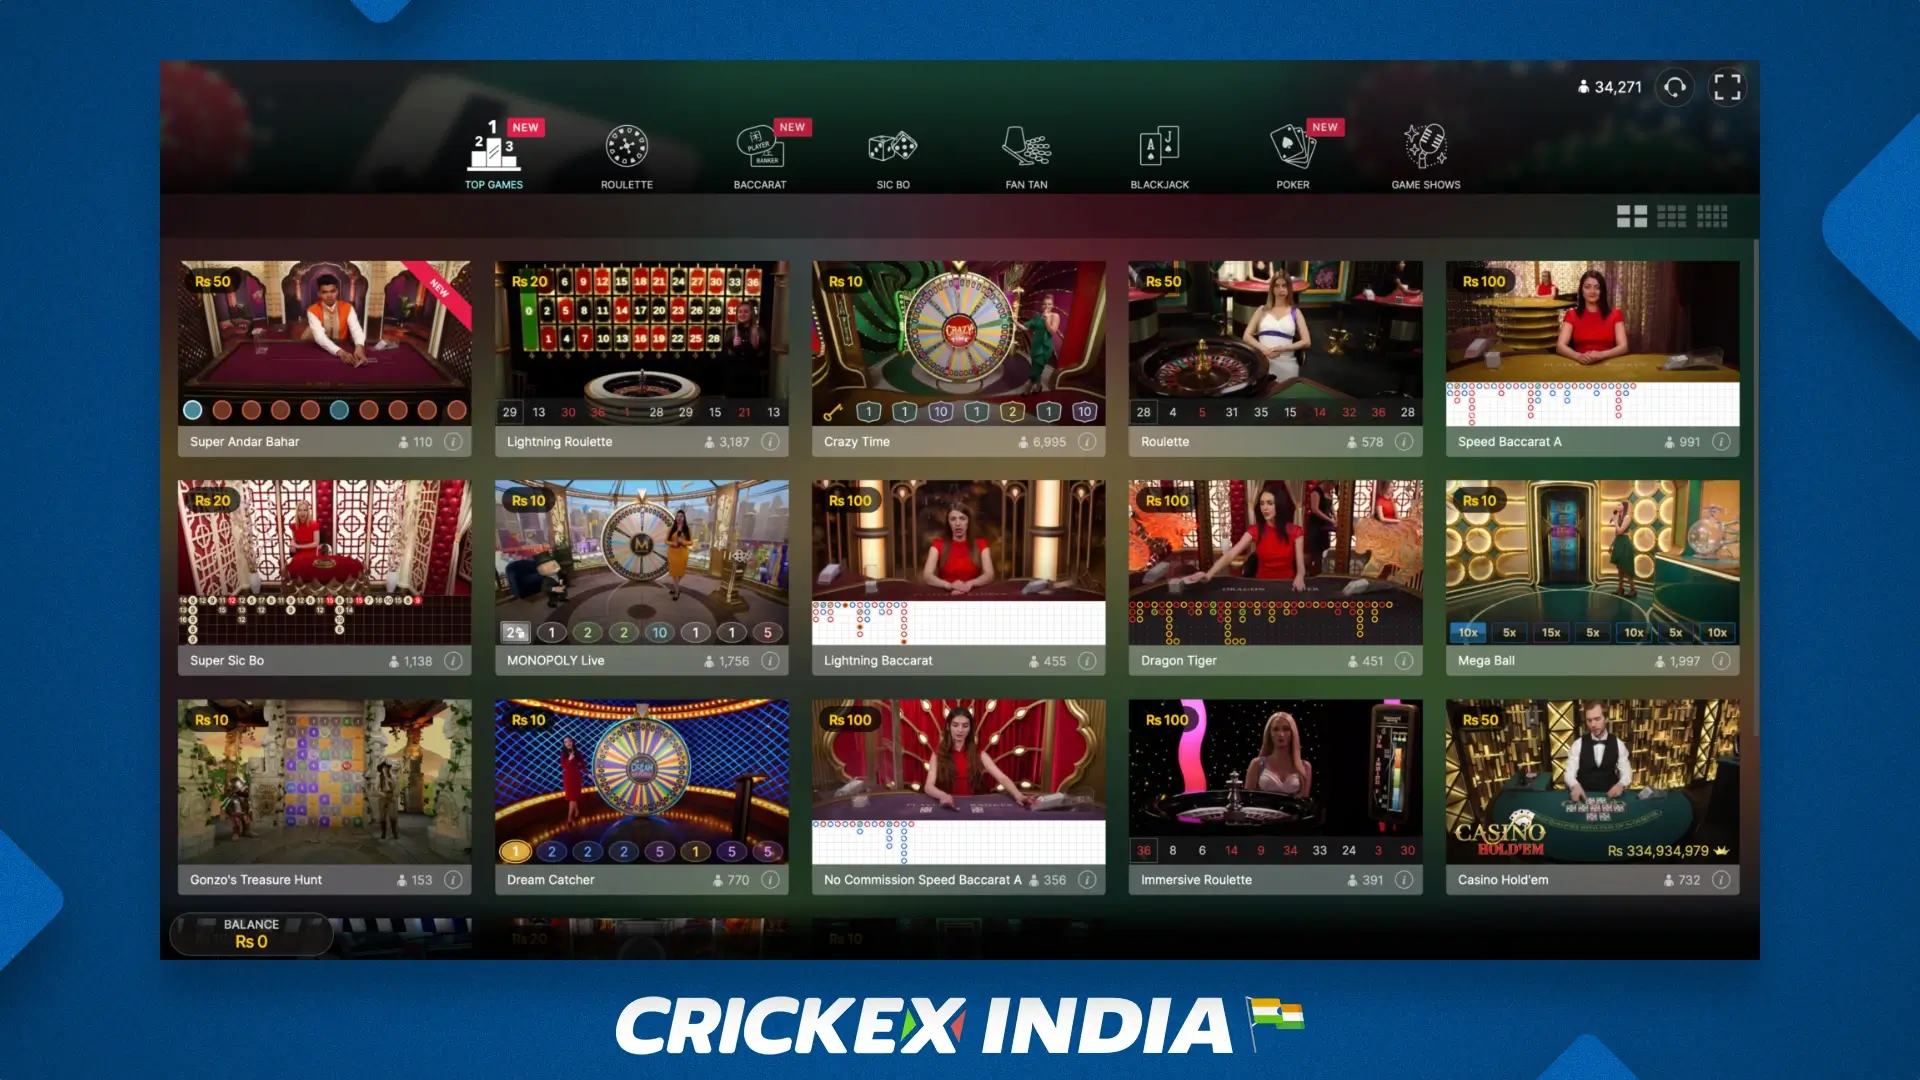 Crickex casino offers a lot of entertainment, including roulette, blackjack, baccarat and others